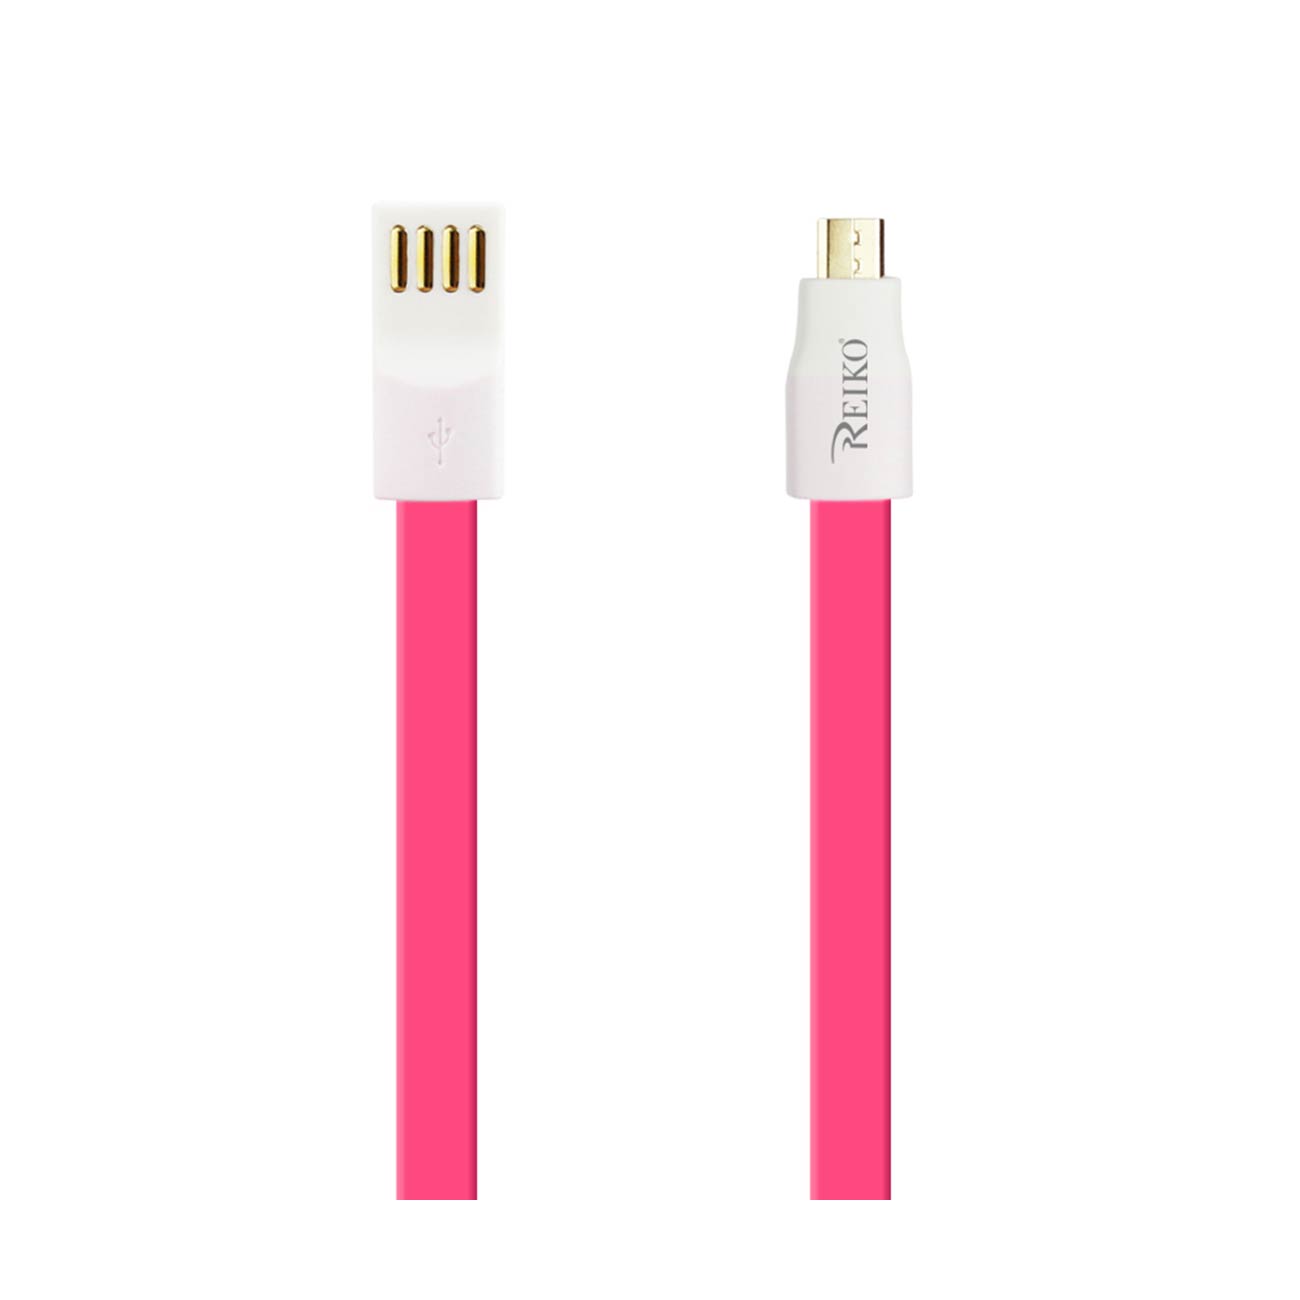 Data Cable USB Micro Flat Magnetic Gold Plated 9670t 0.7 Foot Carriers AT&T Blackberry Style Hot Pink Color